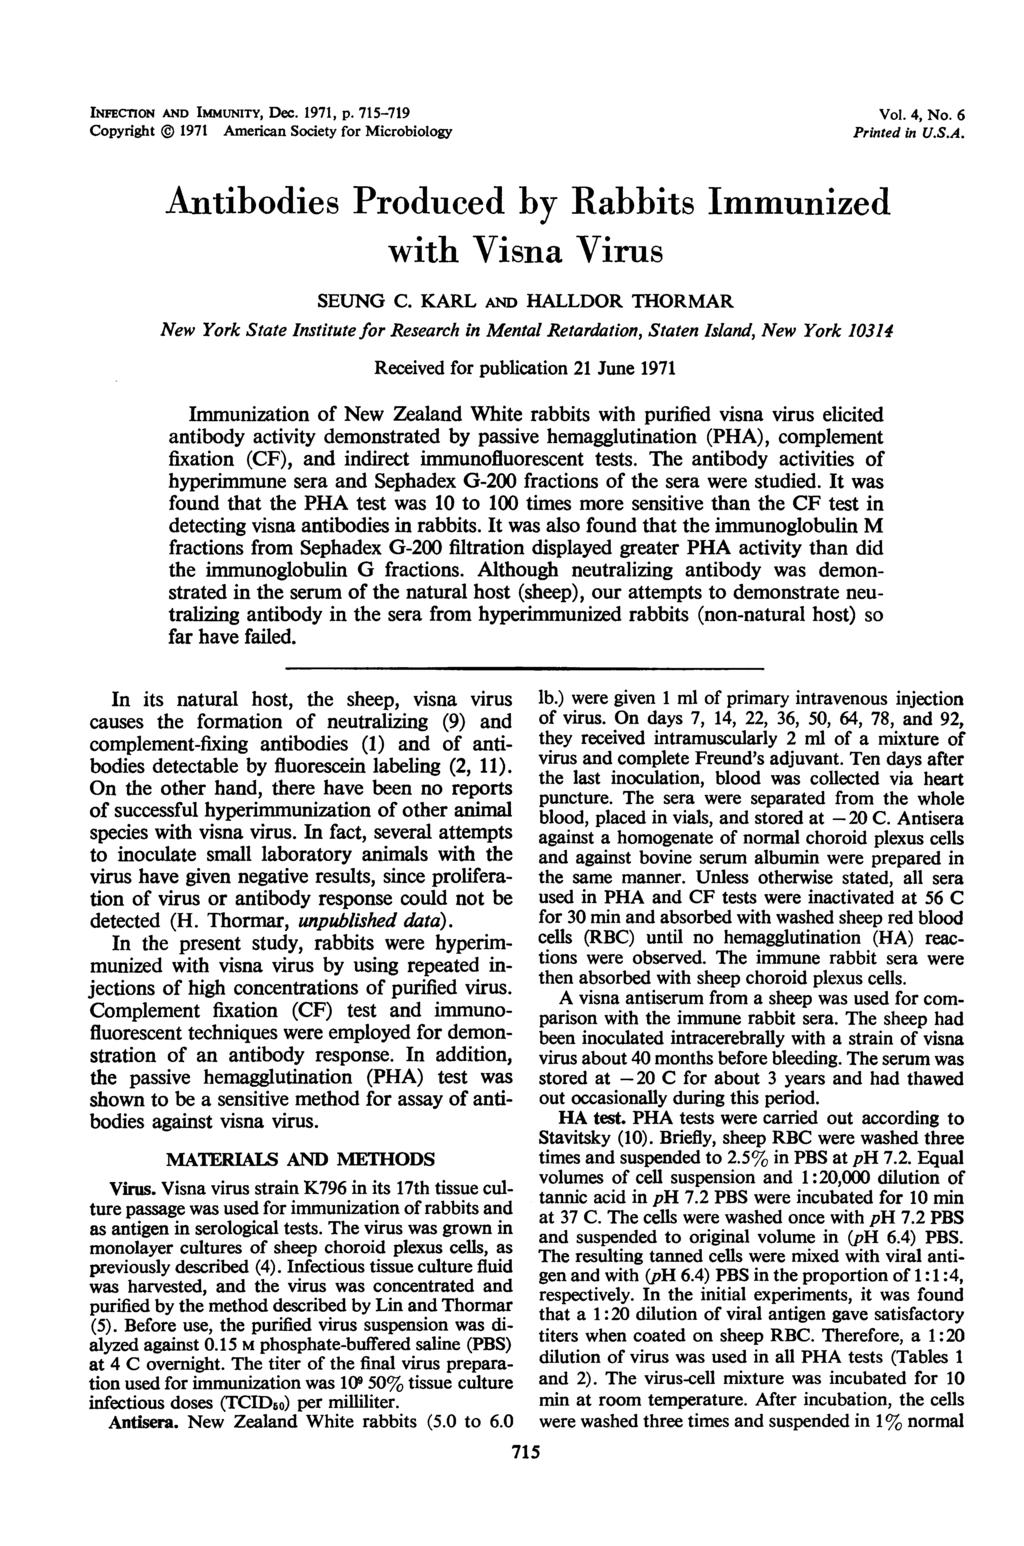 INFECTION AND IMMUNITY, Dec. 1971, p. 715-719 Copyright 1971 American Society for Microbiology Vol. 4, No. 6 Printed in U.S.A. Antibodies Produced by Rabbits Immunized ith Visna Virus SEUNG C.